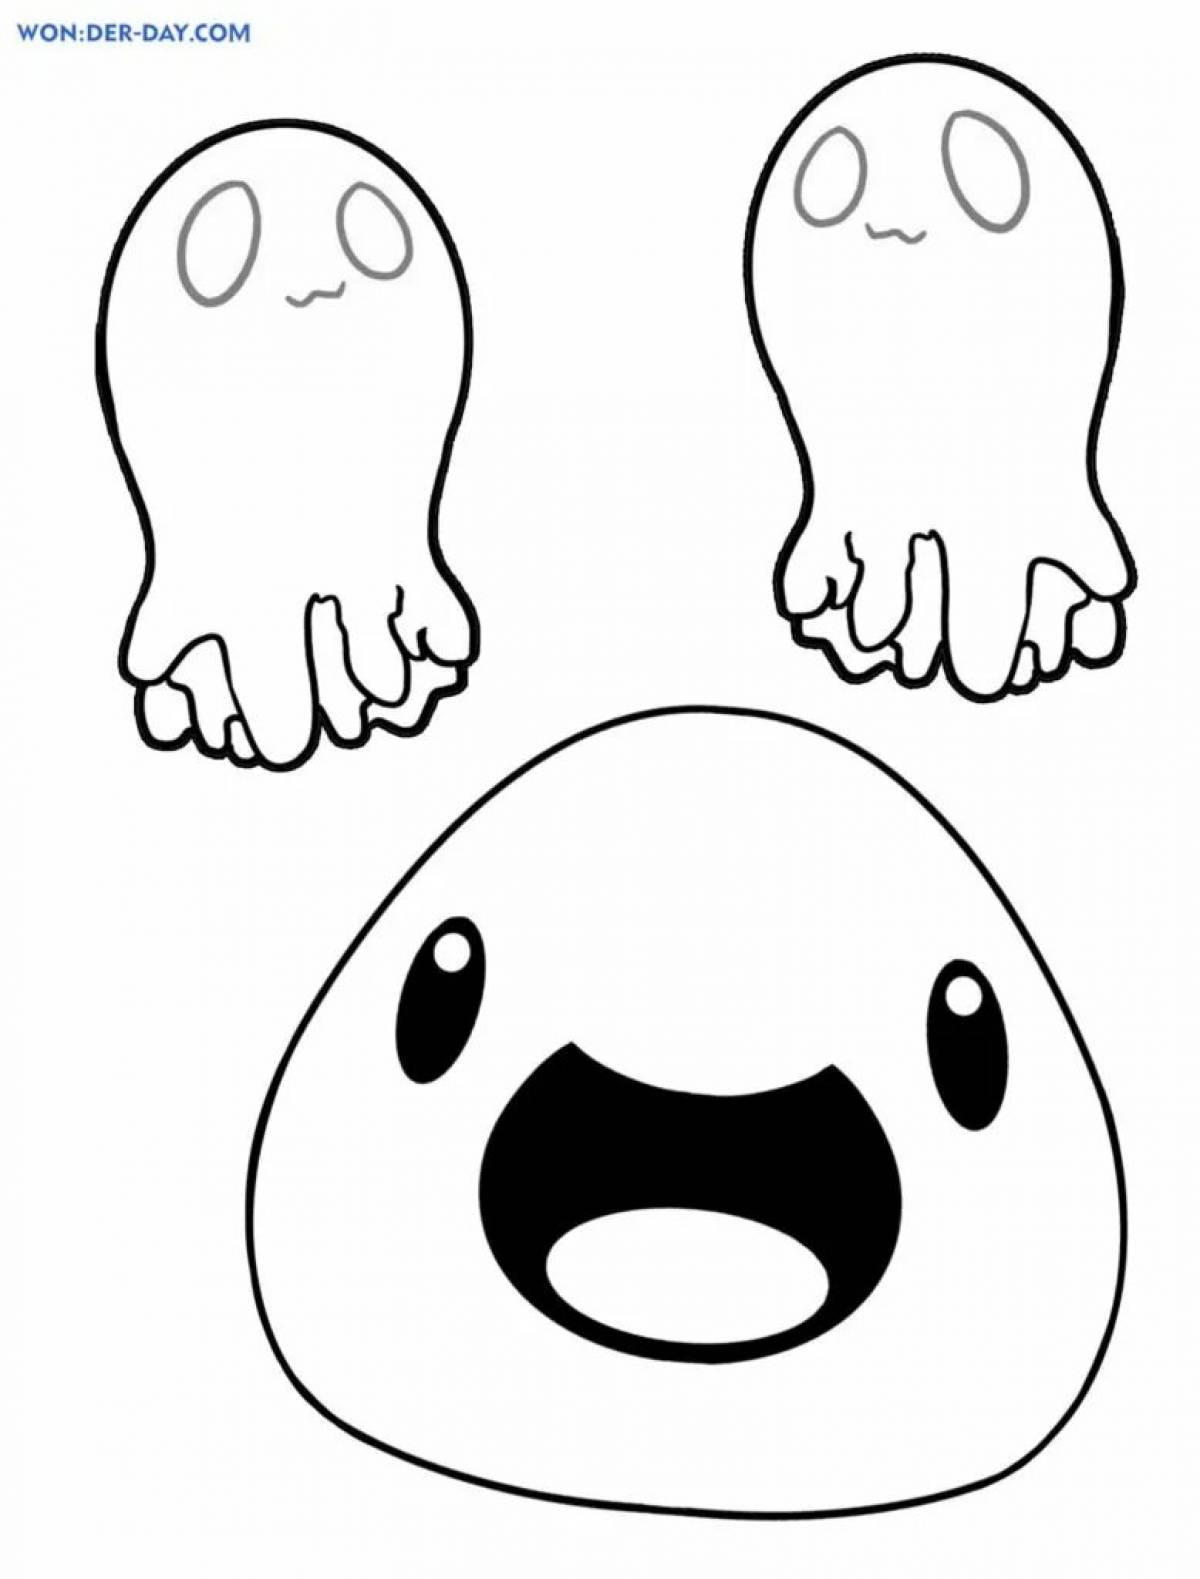 Cute slime rancher coloring book